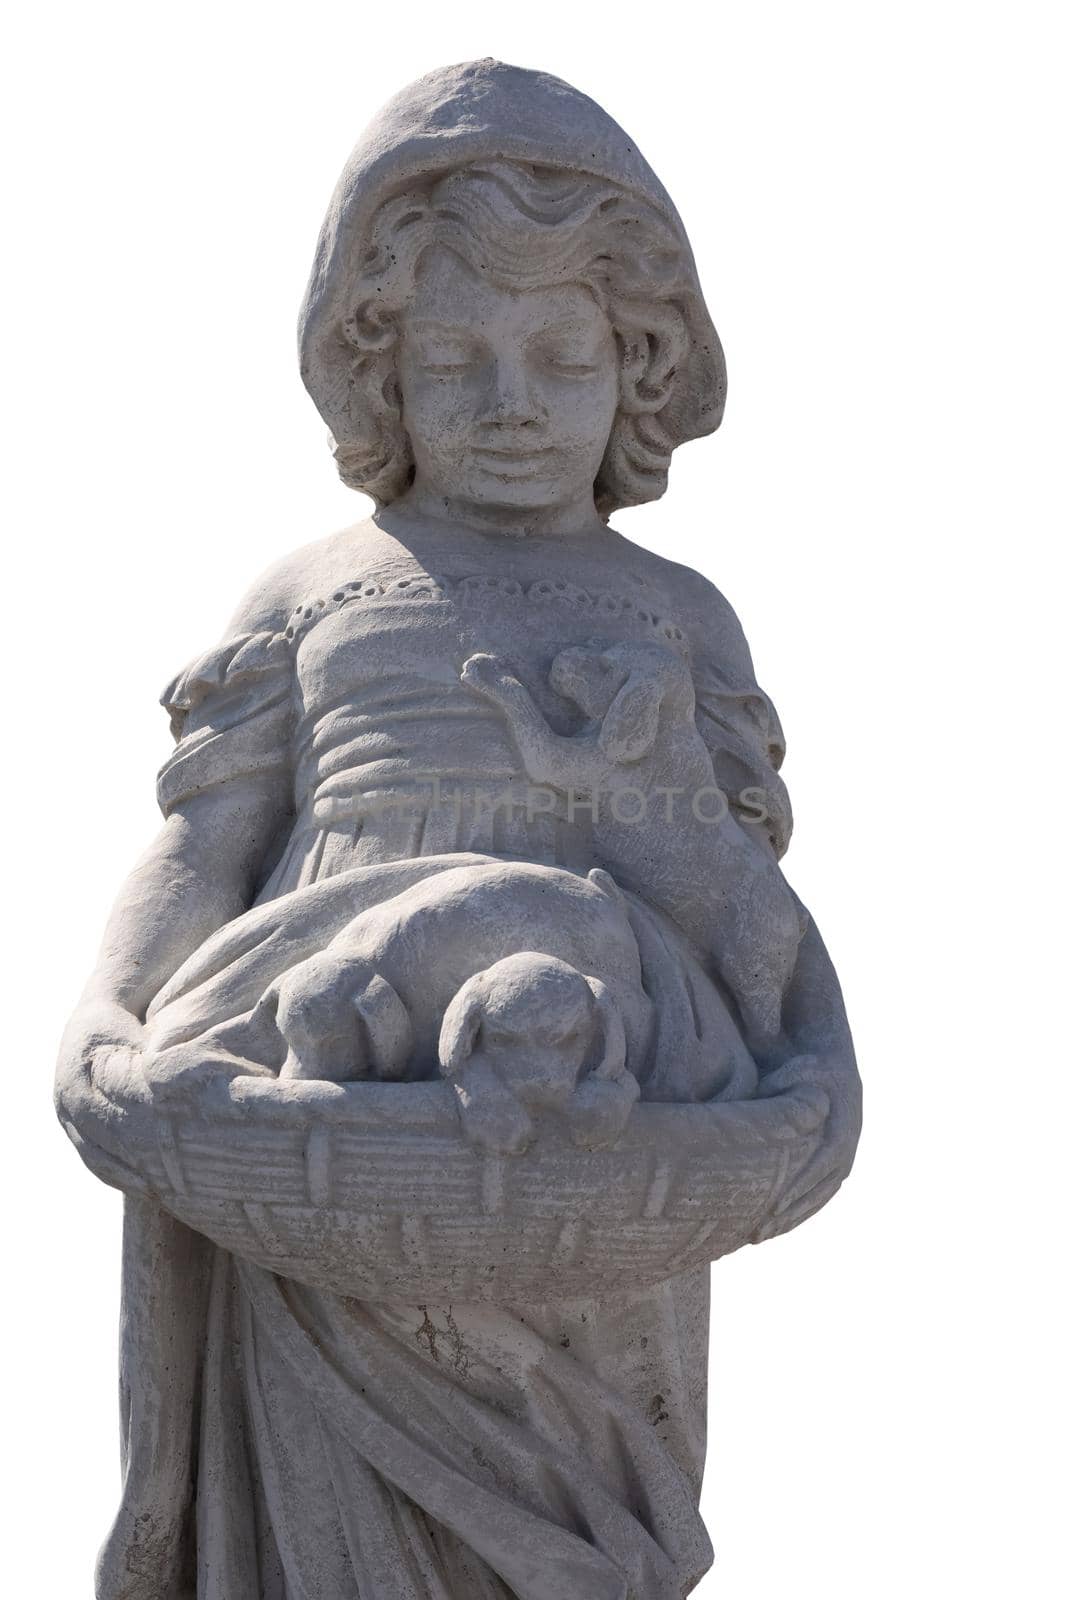 Close up of stone sculpture of girl holding puppies in basket on white background. art and classical style romantic figurative stone sculpture.